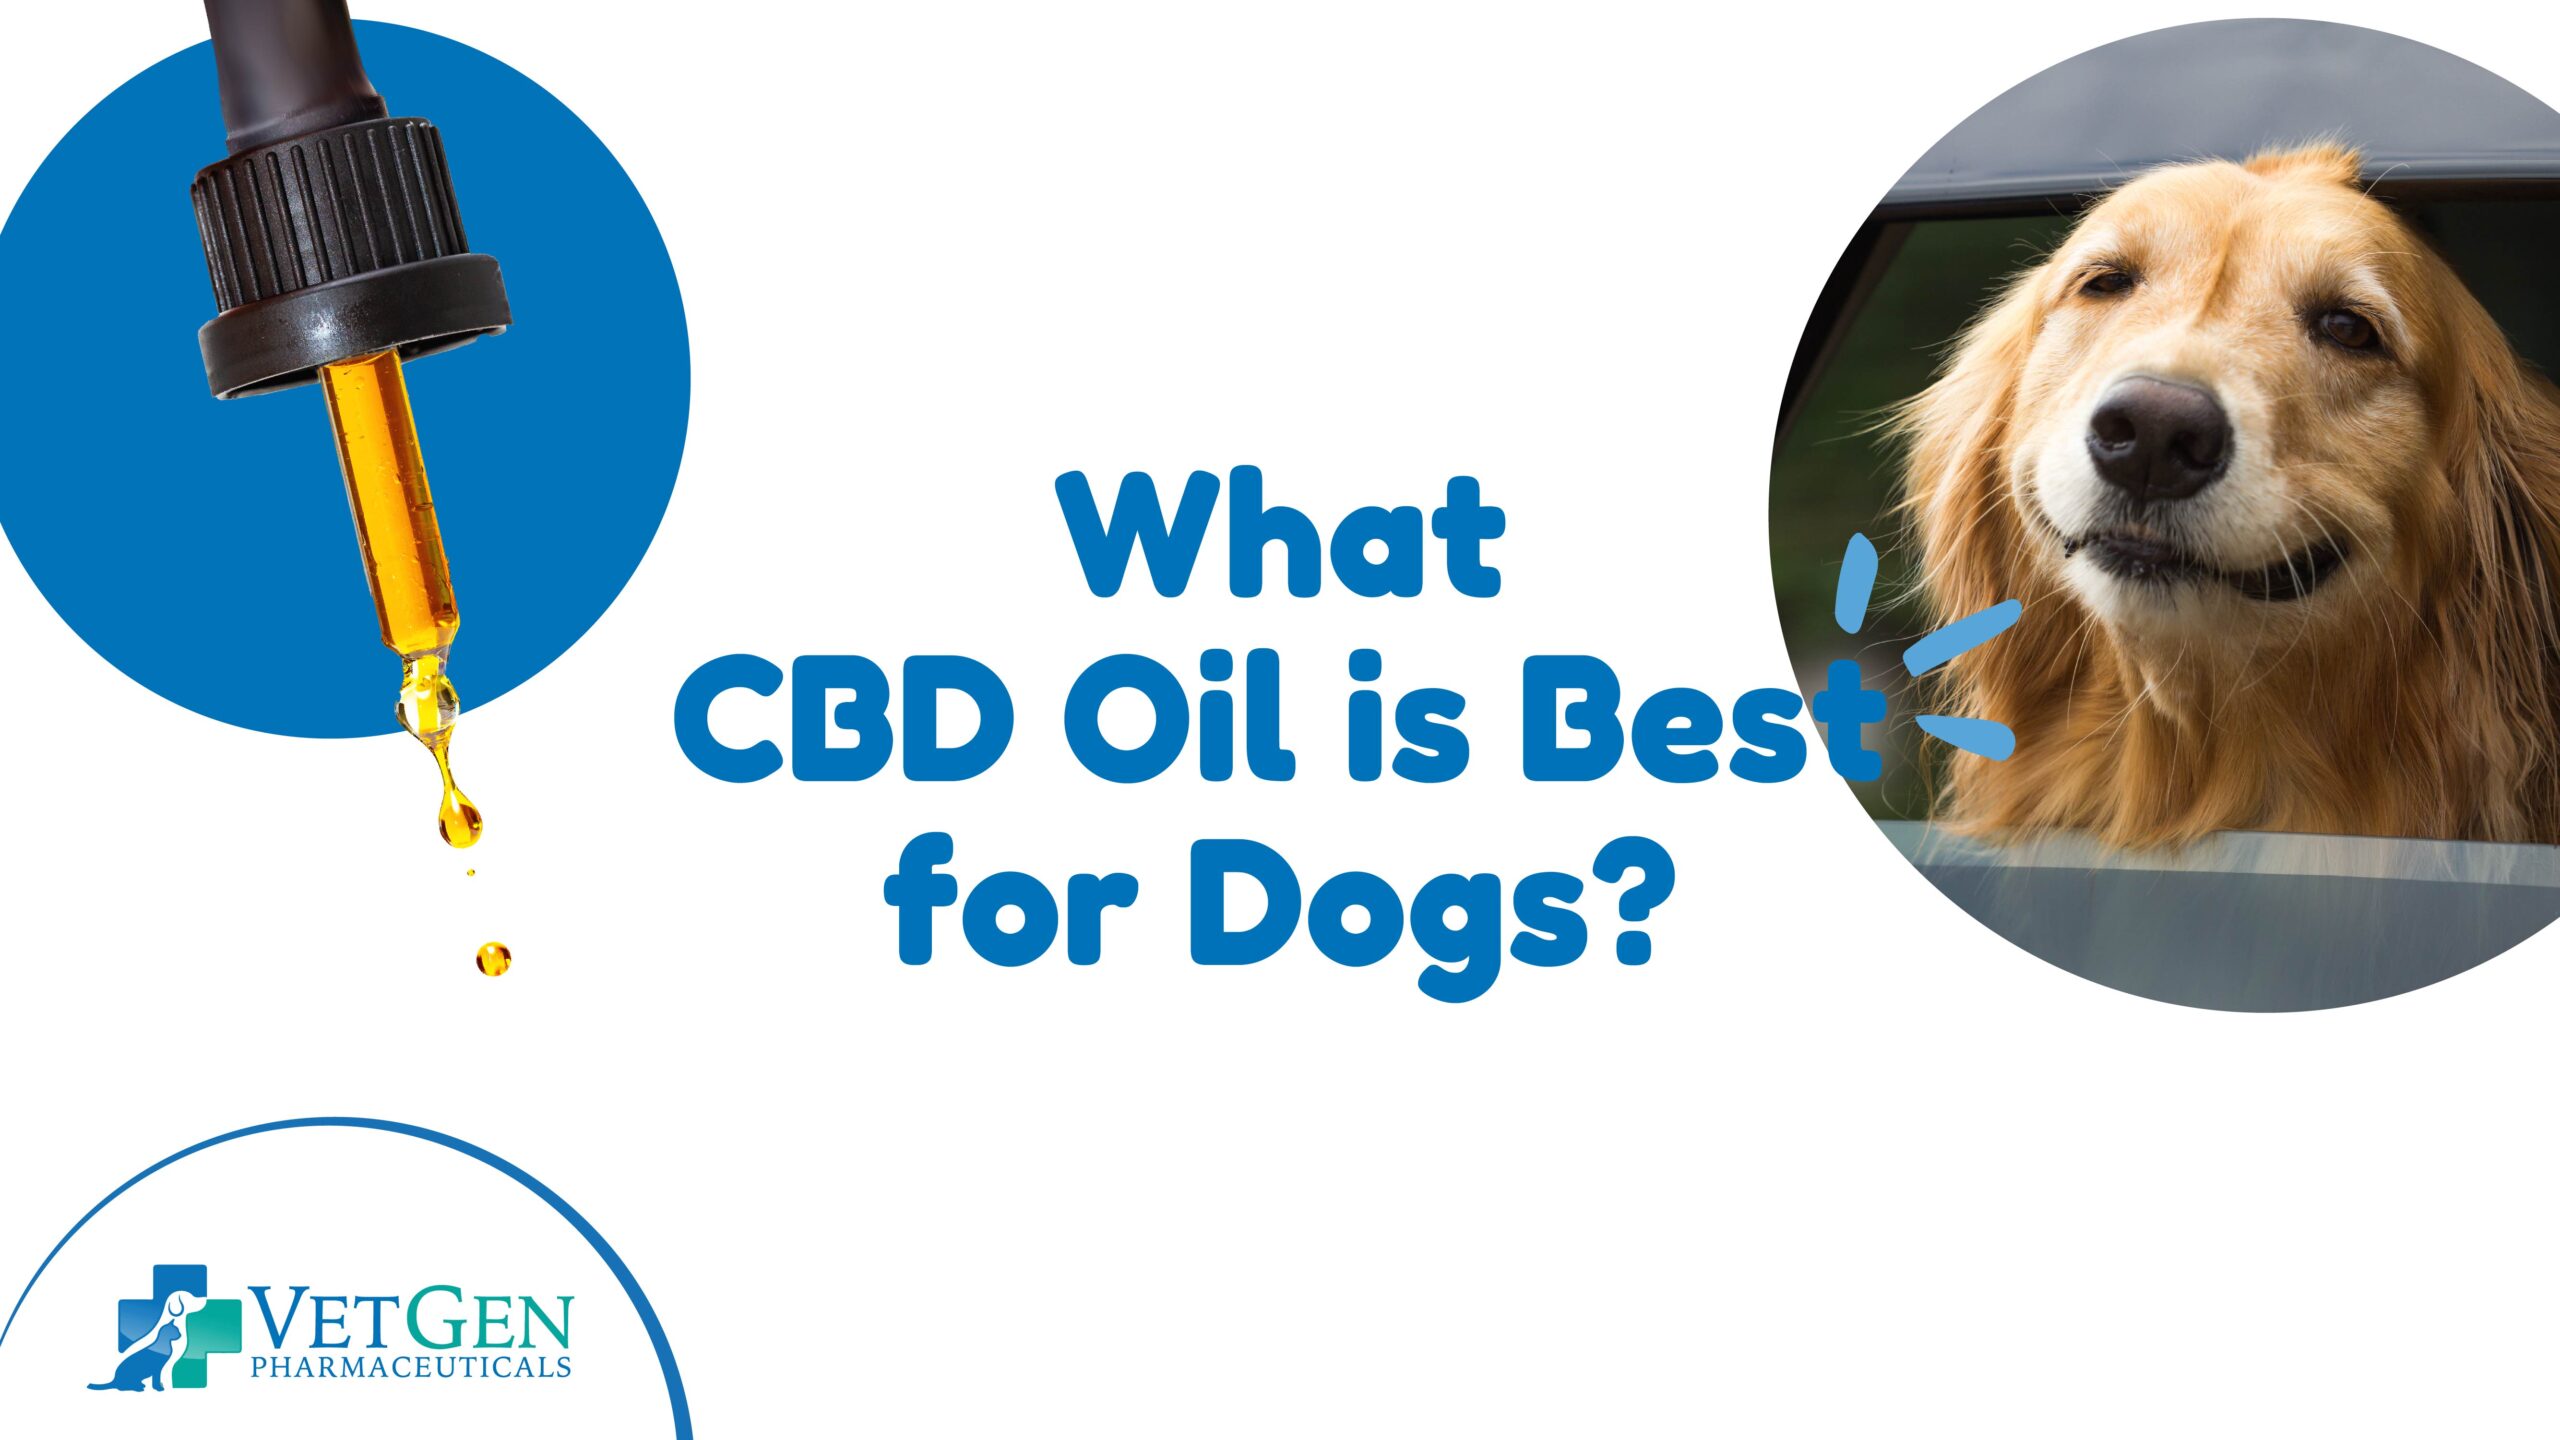 What CBD oil is best for dogs